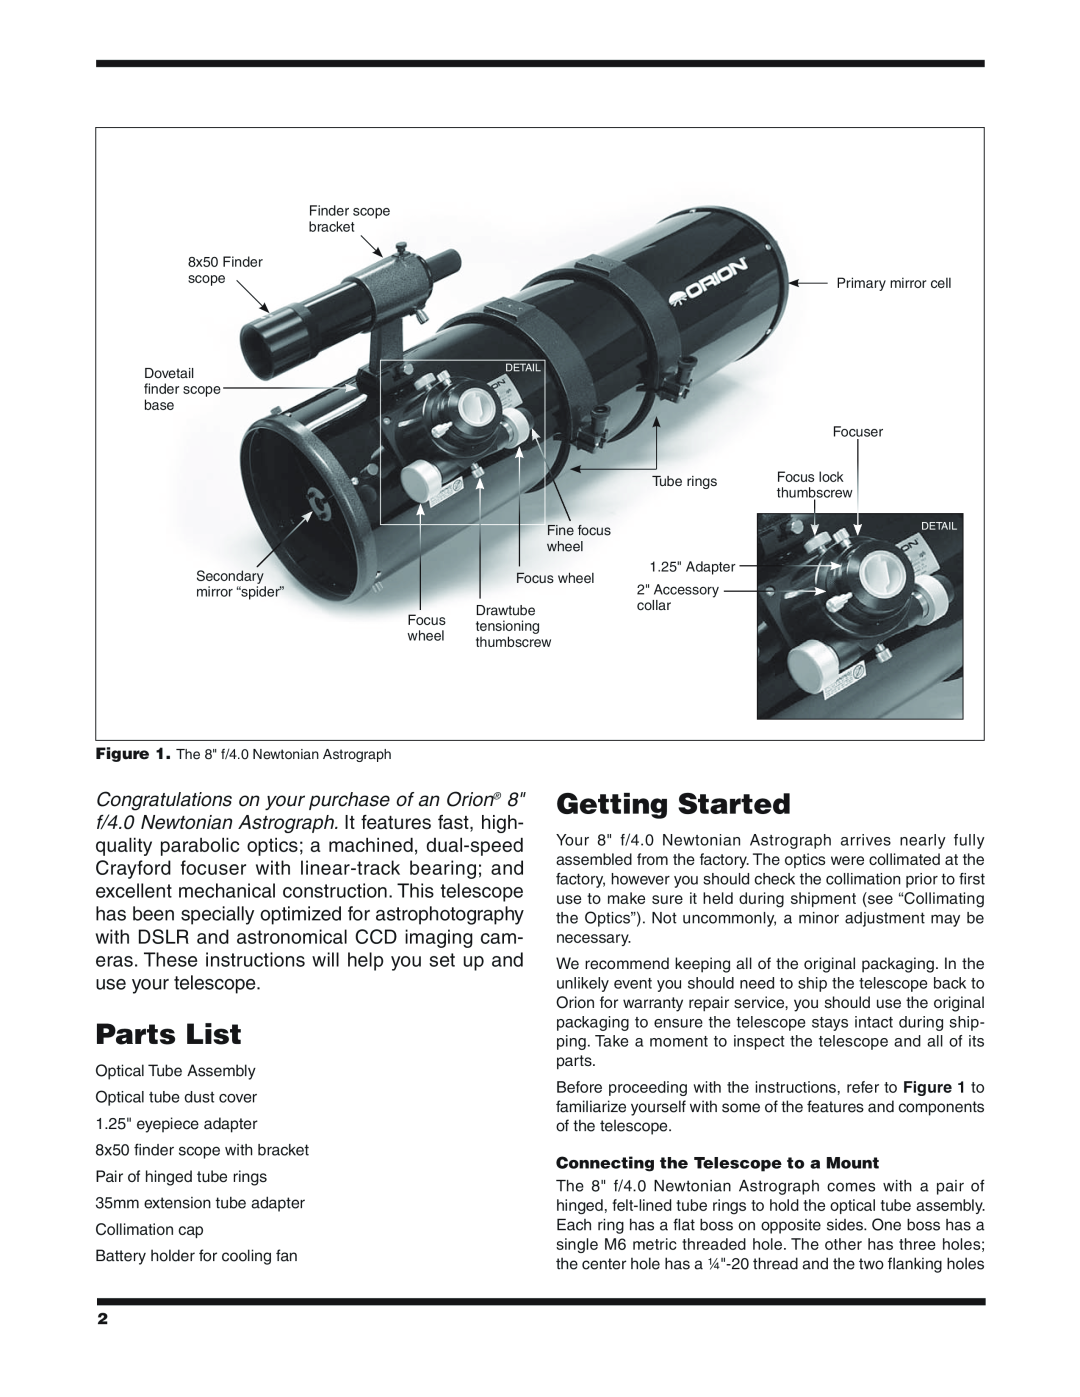 Orion 9527 instruction manual Parts List, Getting Started, Connecting the Telescope to a Mount 